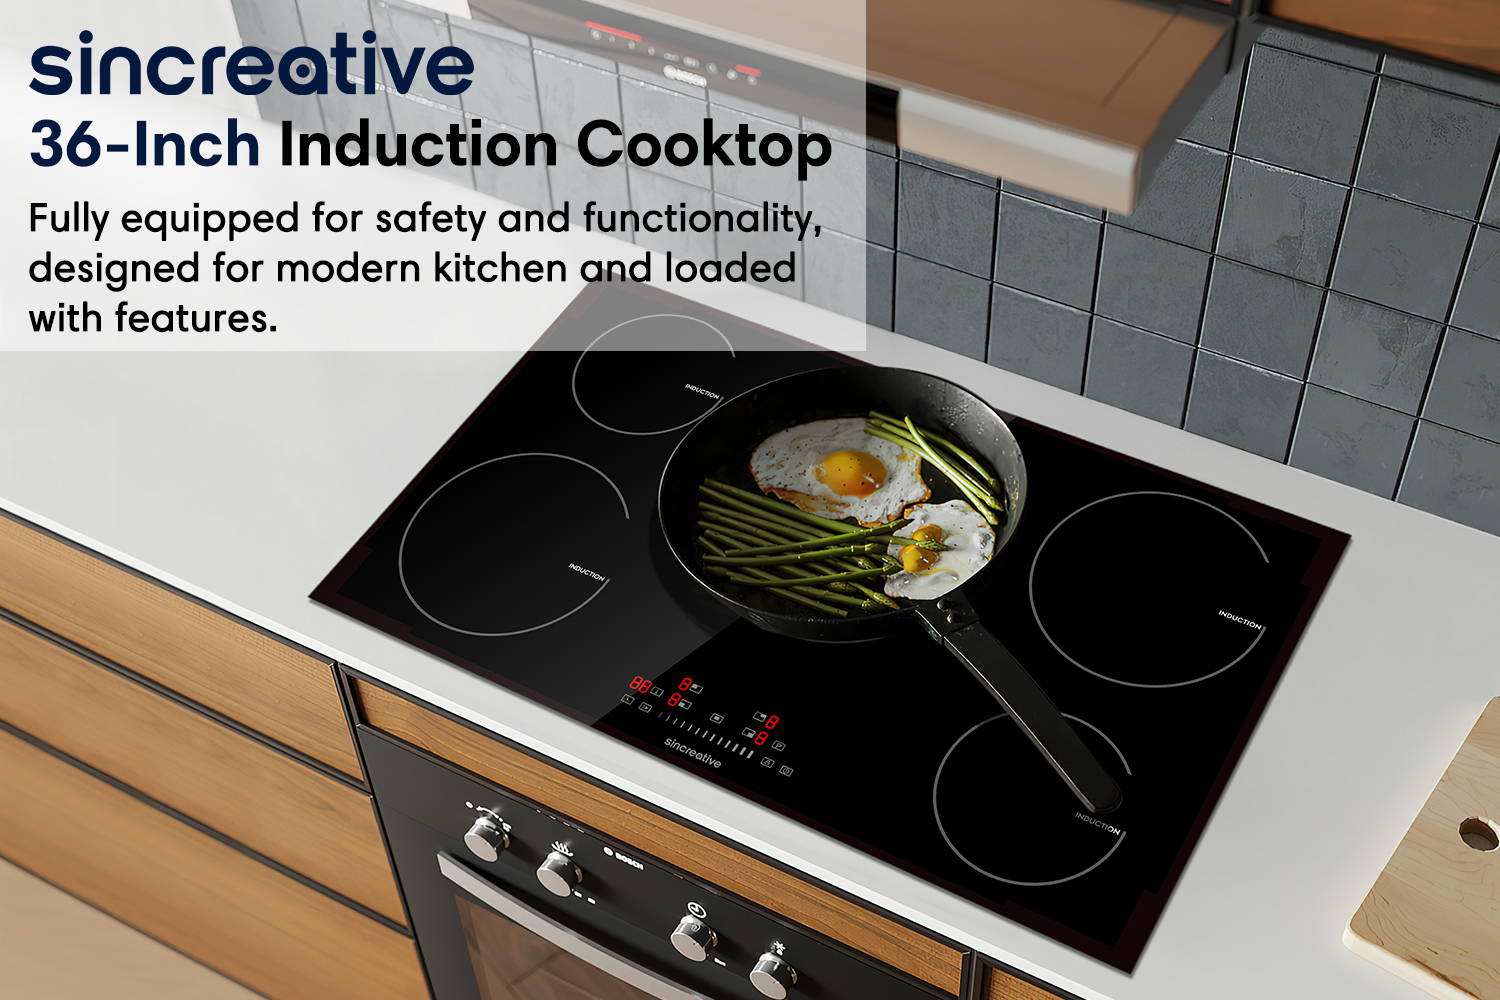 36-inch induction cooktop fully equipped for safety and functionality, designed for modern kitchen and loaded with features.